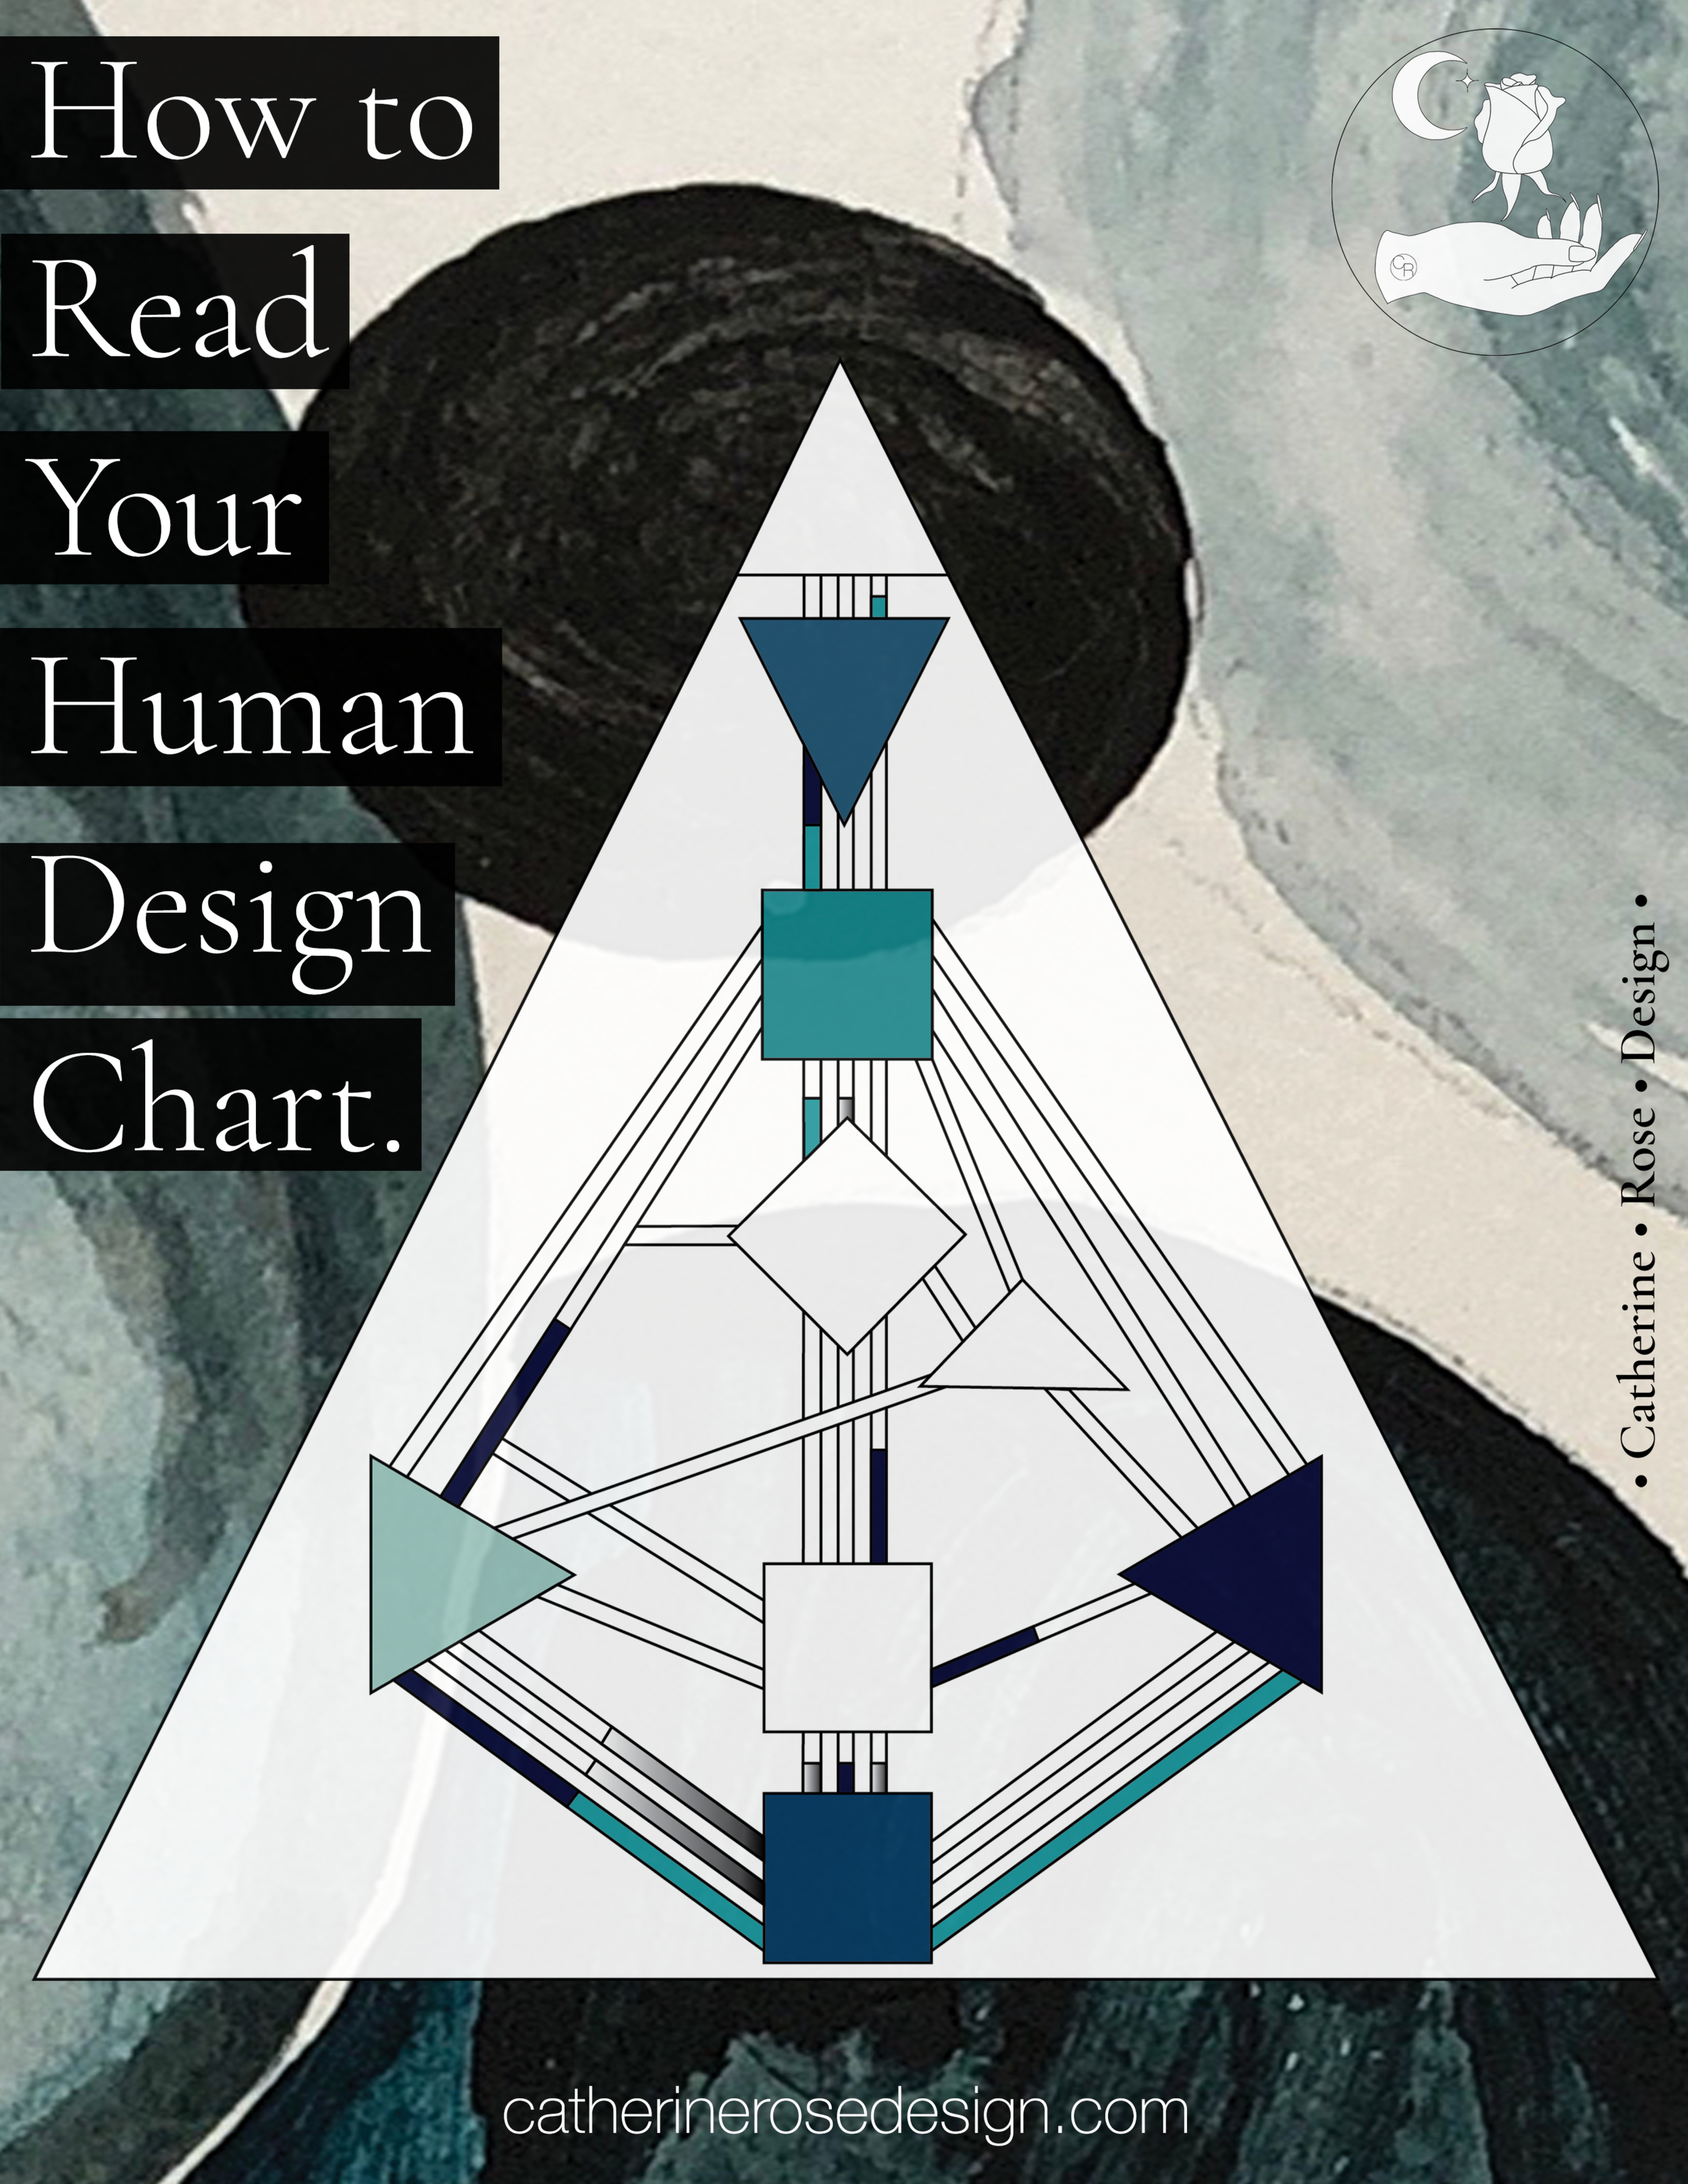 how-to-read-your-human-design-chart-catherine-rose-design